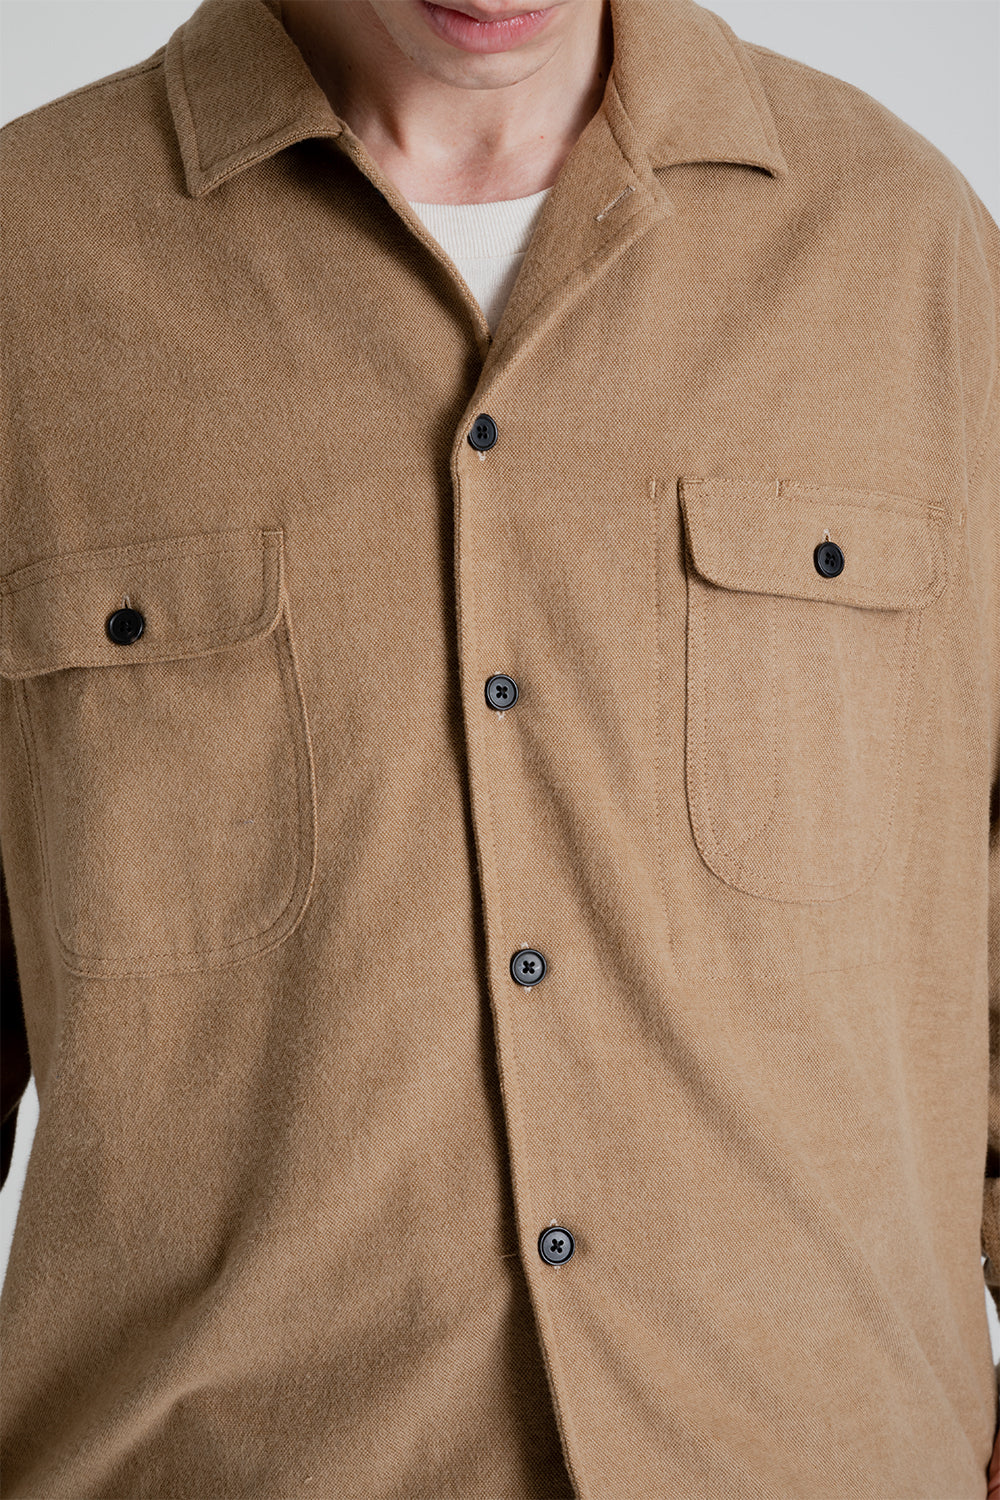 S.K. Manor Hill Park Shirt in Earth Cotton Flannel